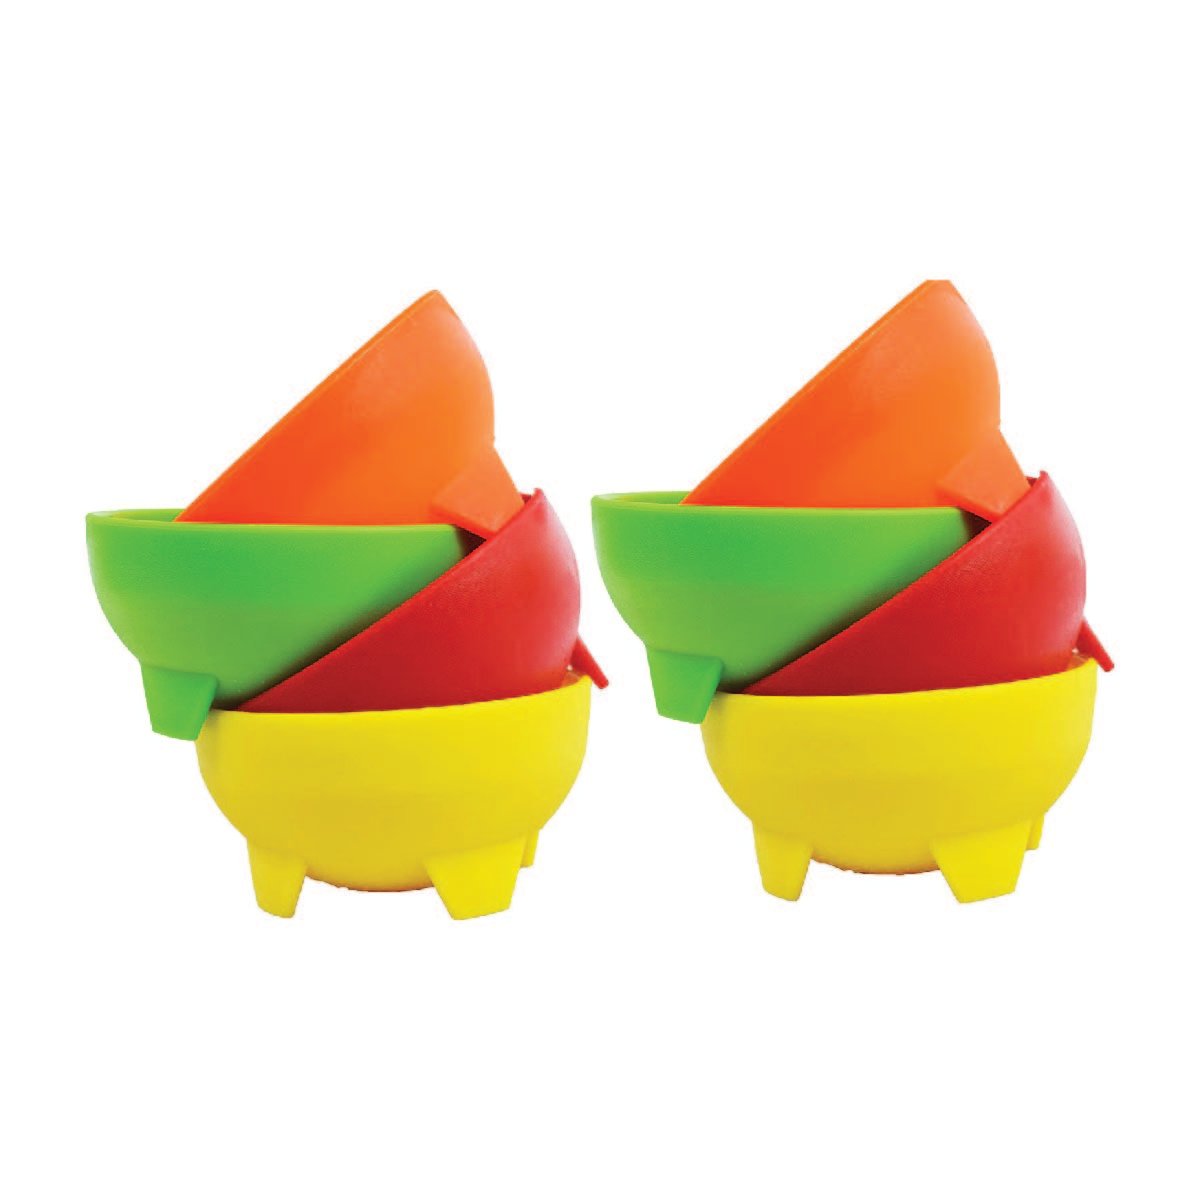 Eight small brightly colored salsa bowls stacked in two piles.